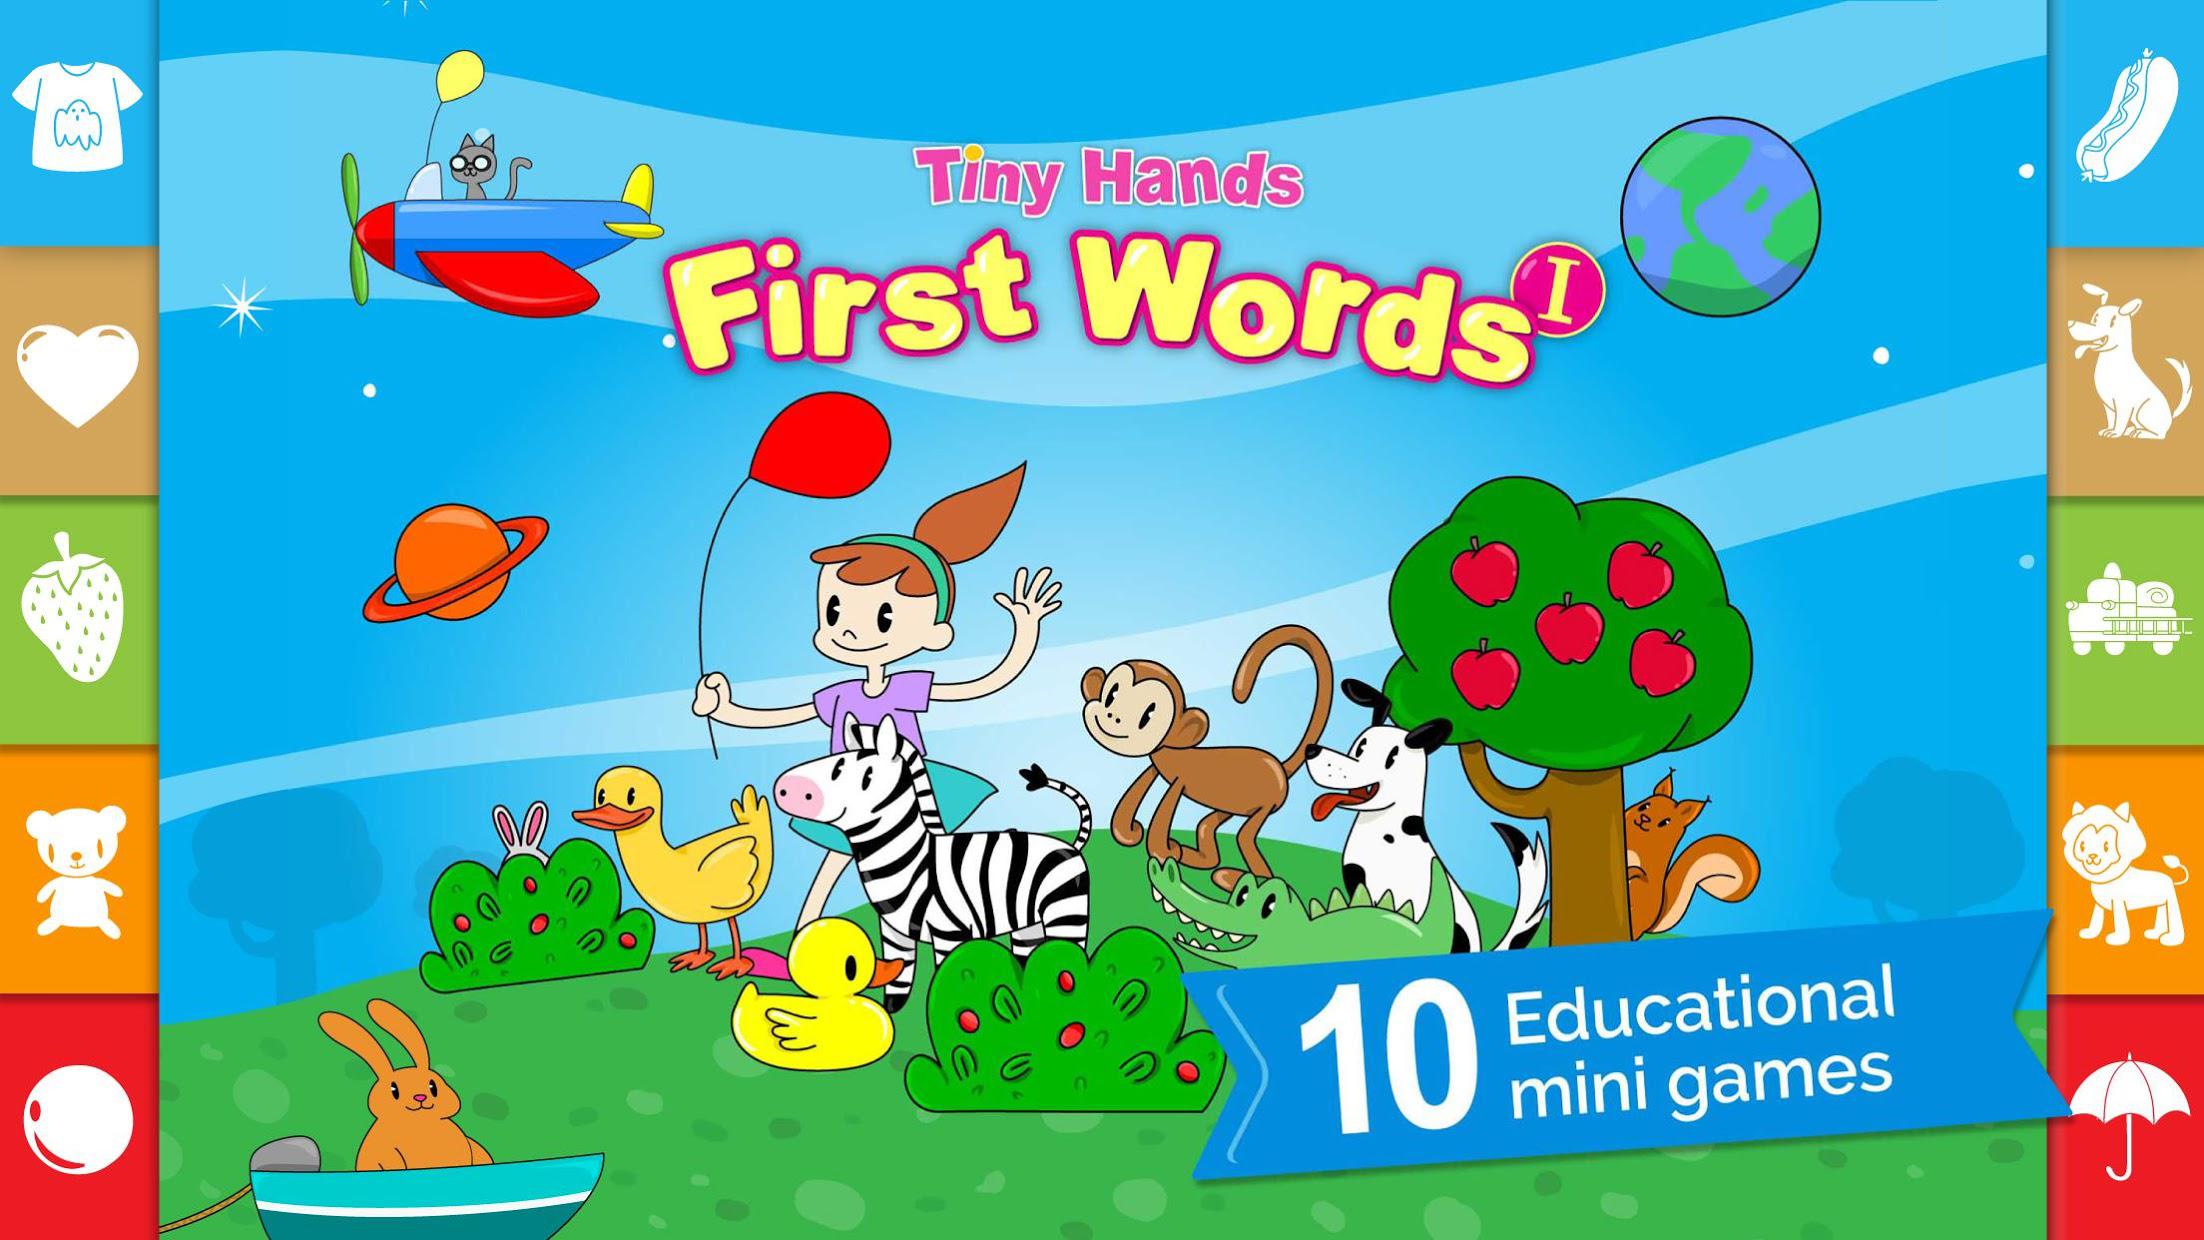 First words kids learn to read_截图_2